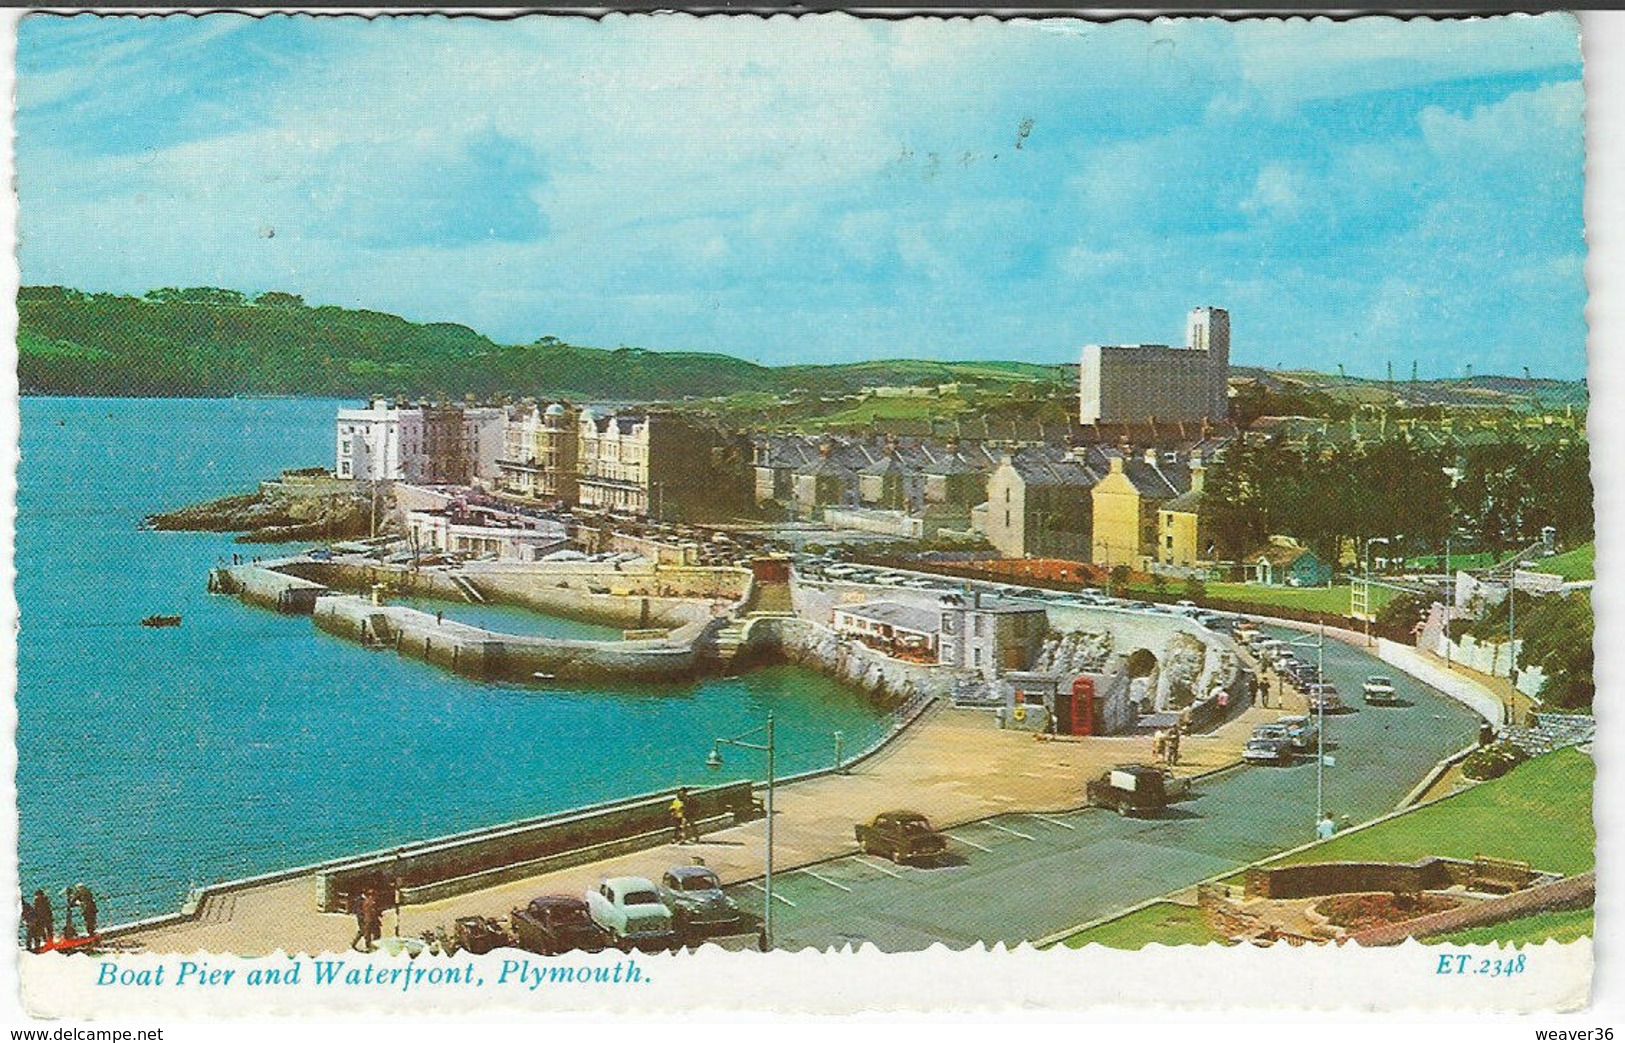 Boat Pier And Waterfront, PLYMOUTH Posted 1965 (Valentine's, ET2348) [P127/1D] - Plymouth